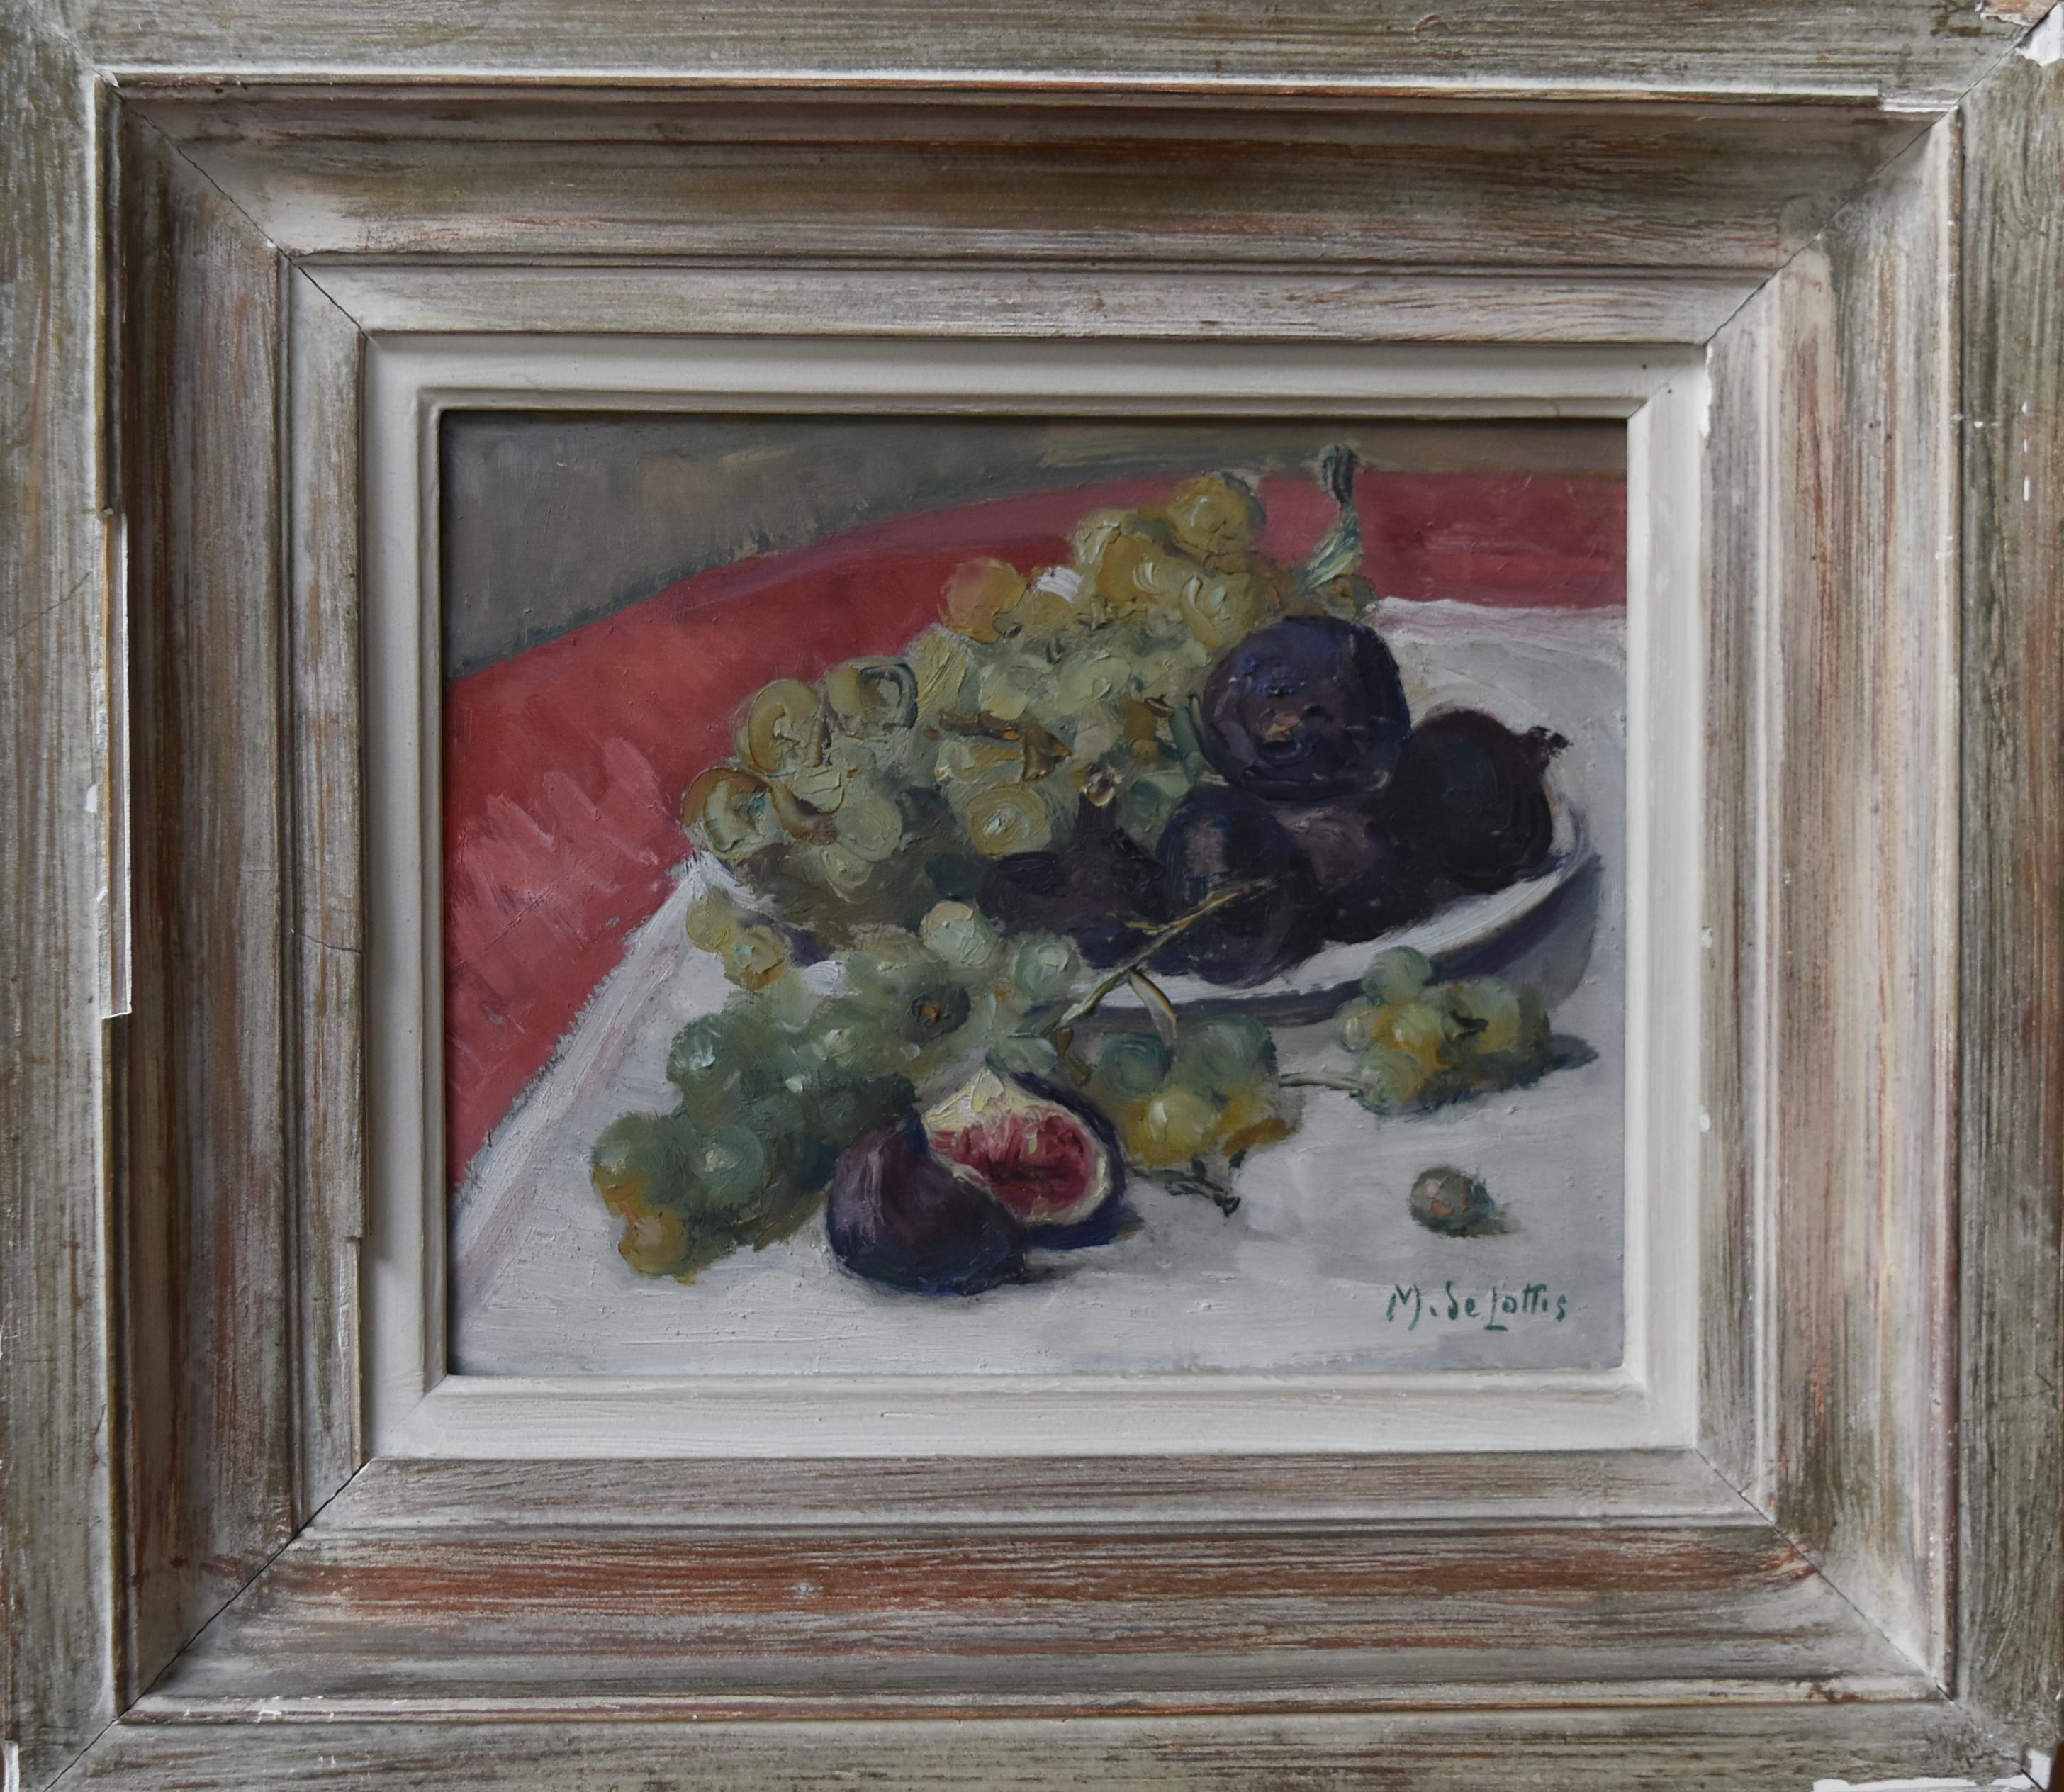 Marguerite de Lottis (Italian Artist active in the first half of the 20th century)
Still Life with red and white grapes and figs
Oil on wooden panel
Signed lower right
21 x 27 cm
framed 39 x 43 (the frame is damaged, but really charming)

Marguerite